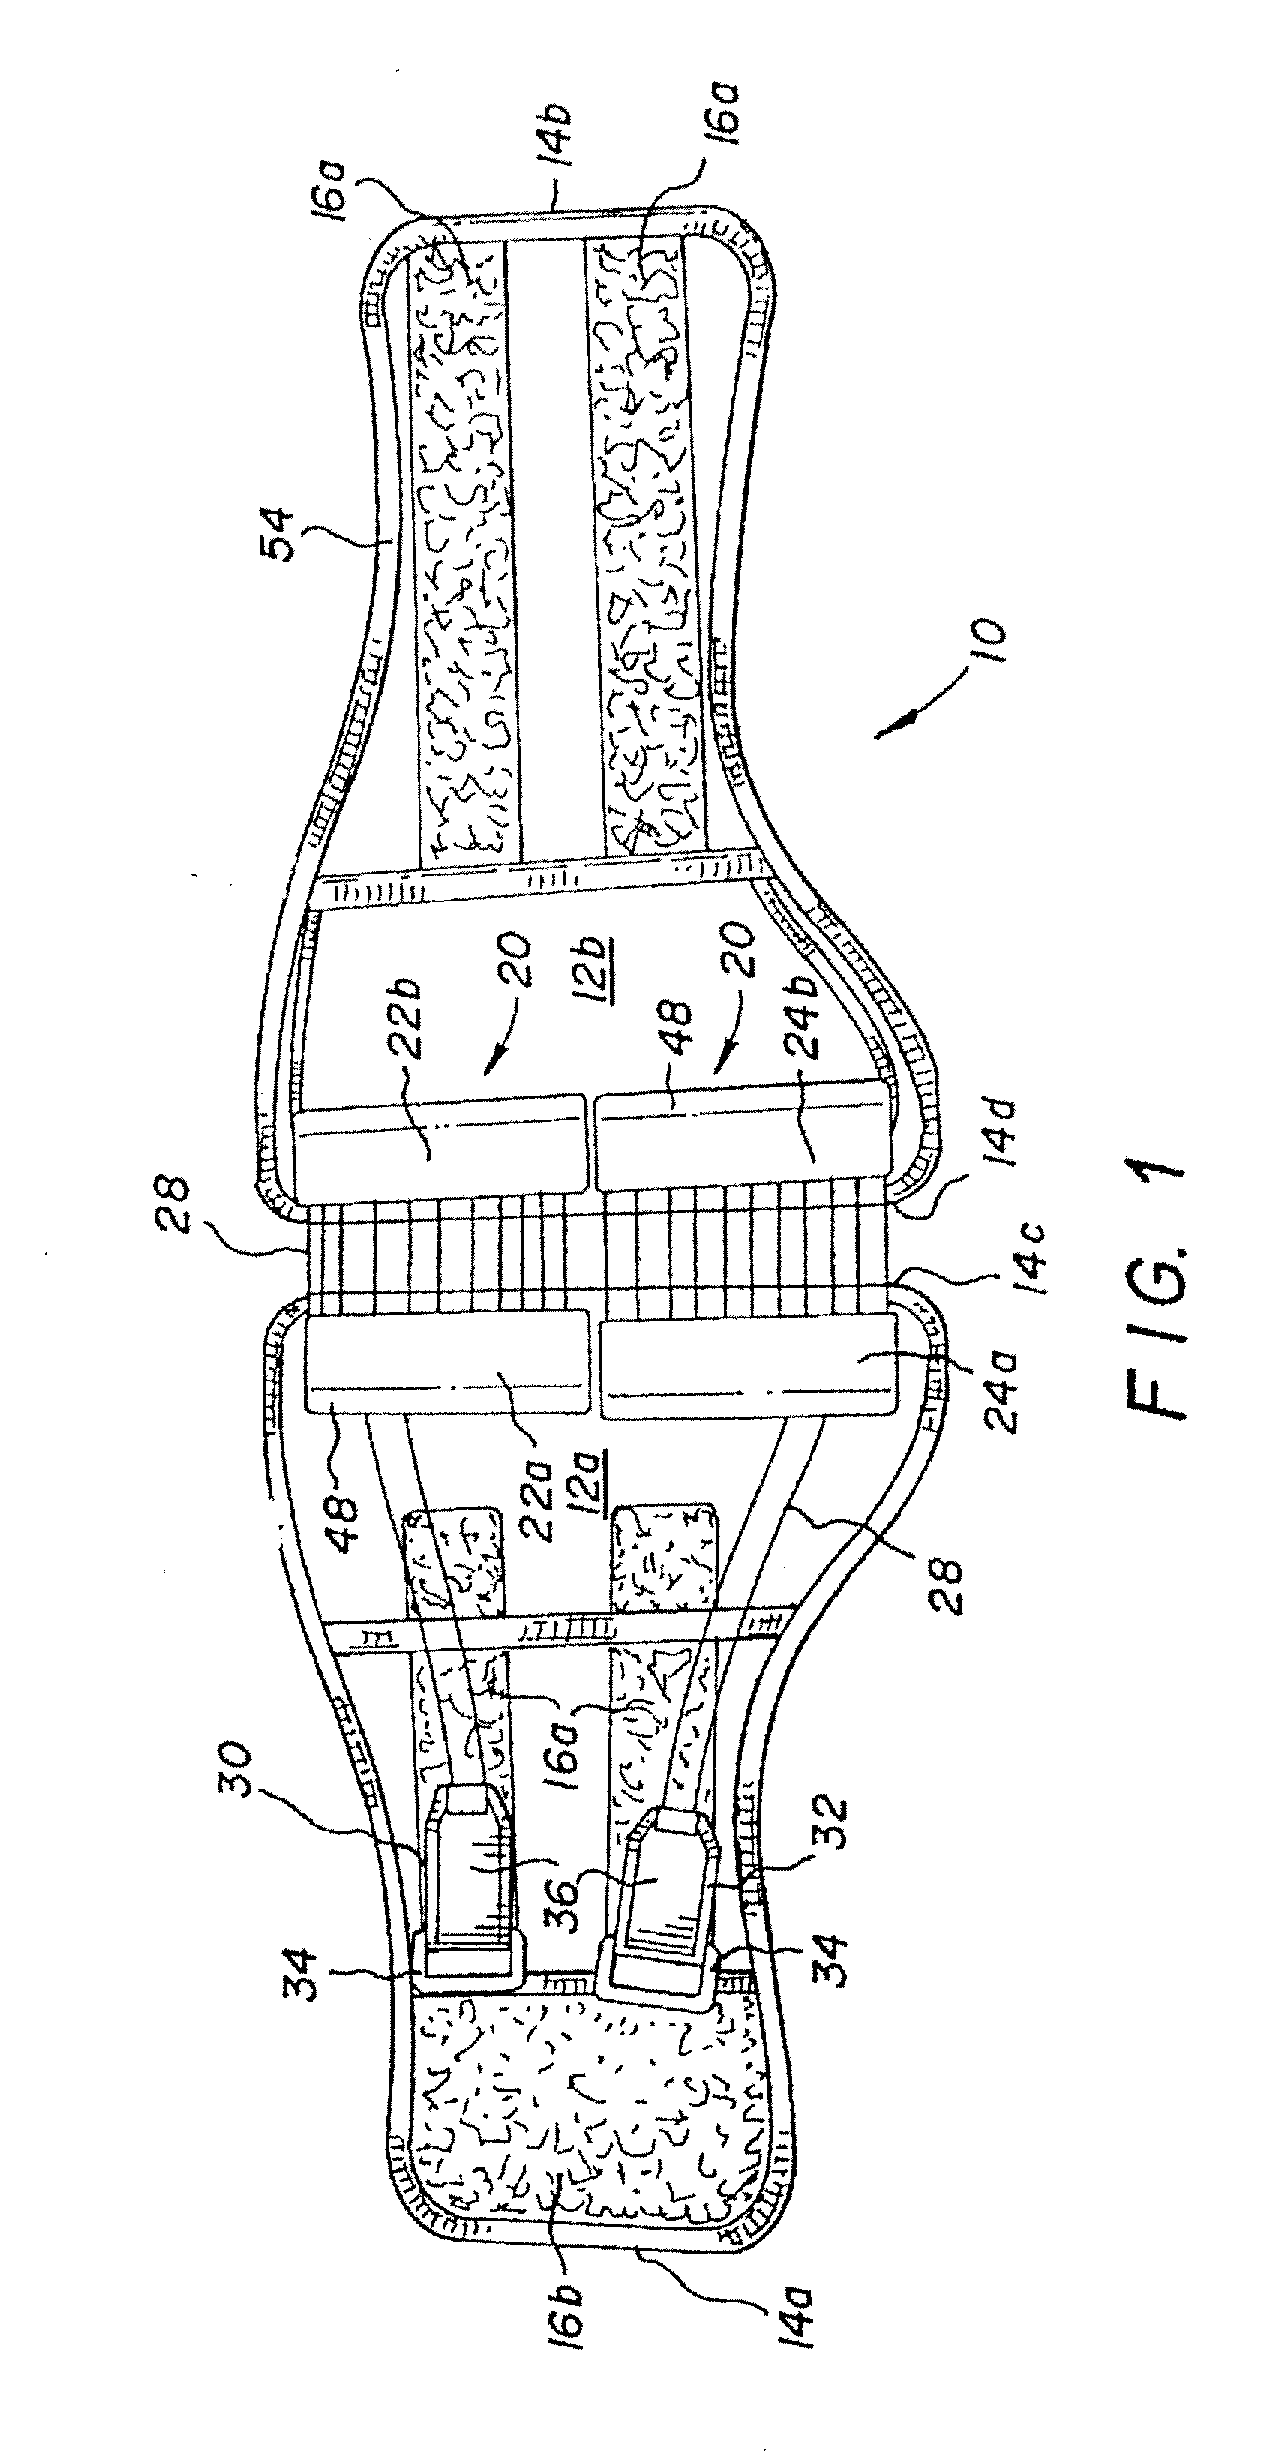 Adjustable closure system for an orthotic device and related methods